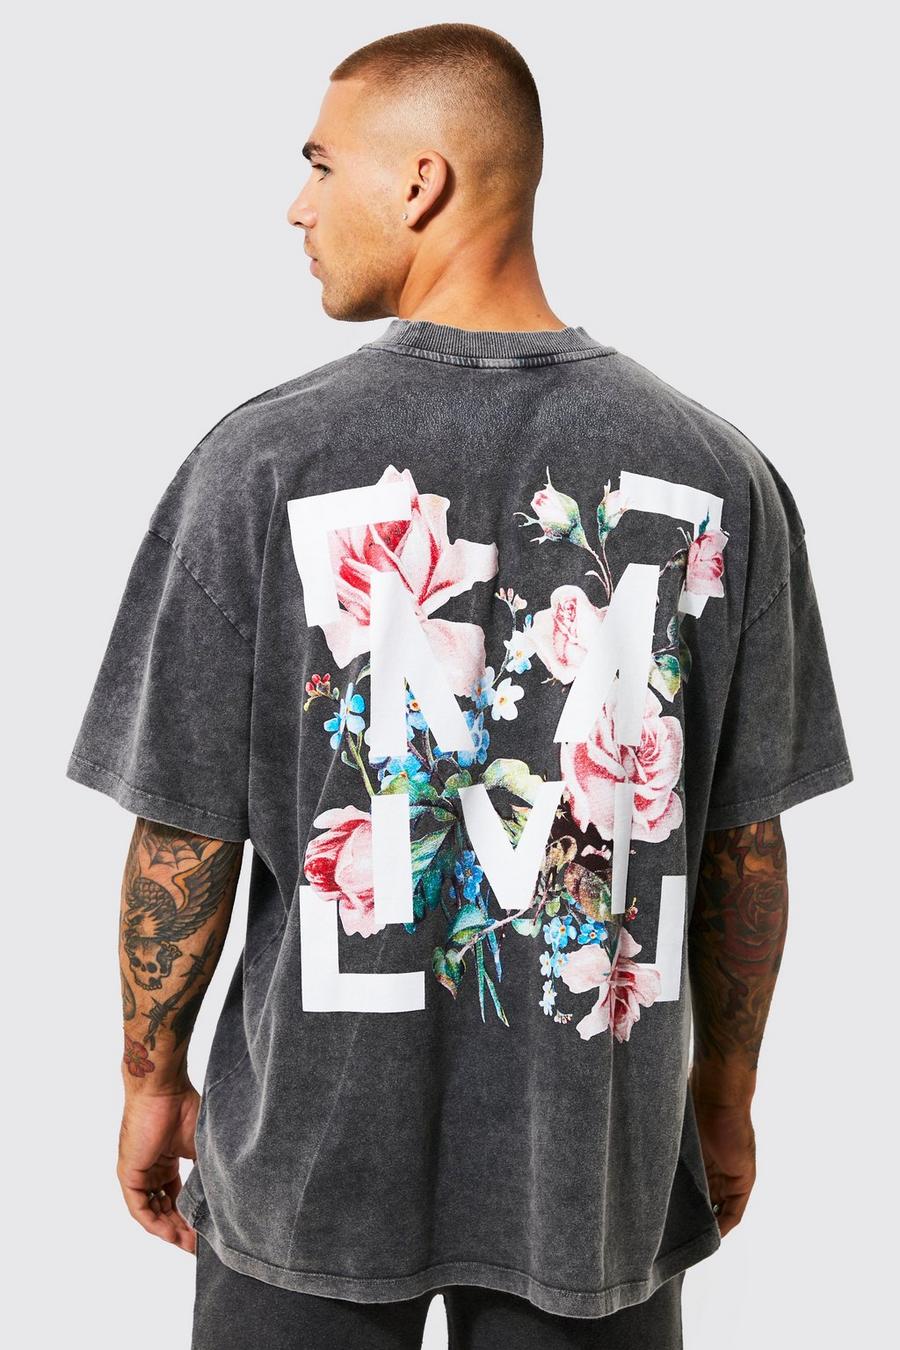 Charcoal grey Oversized Floral Graphic Acid Wash T-shirt